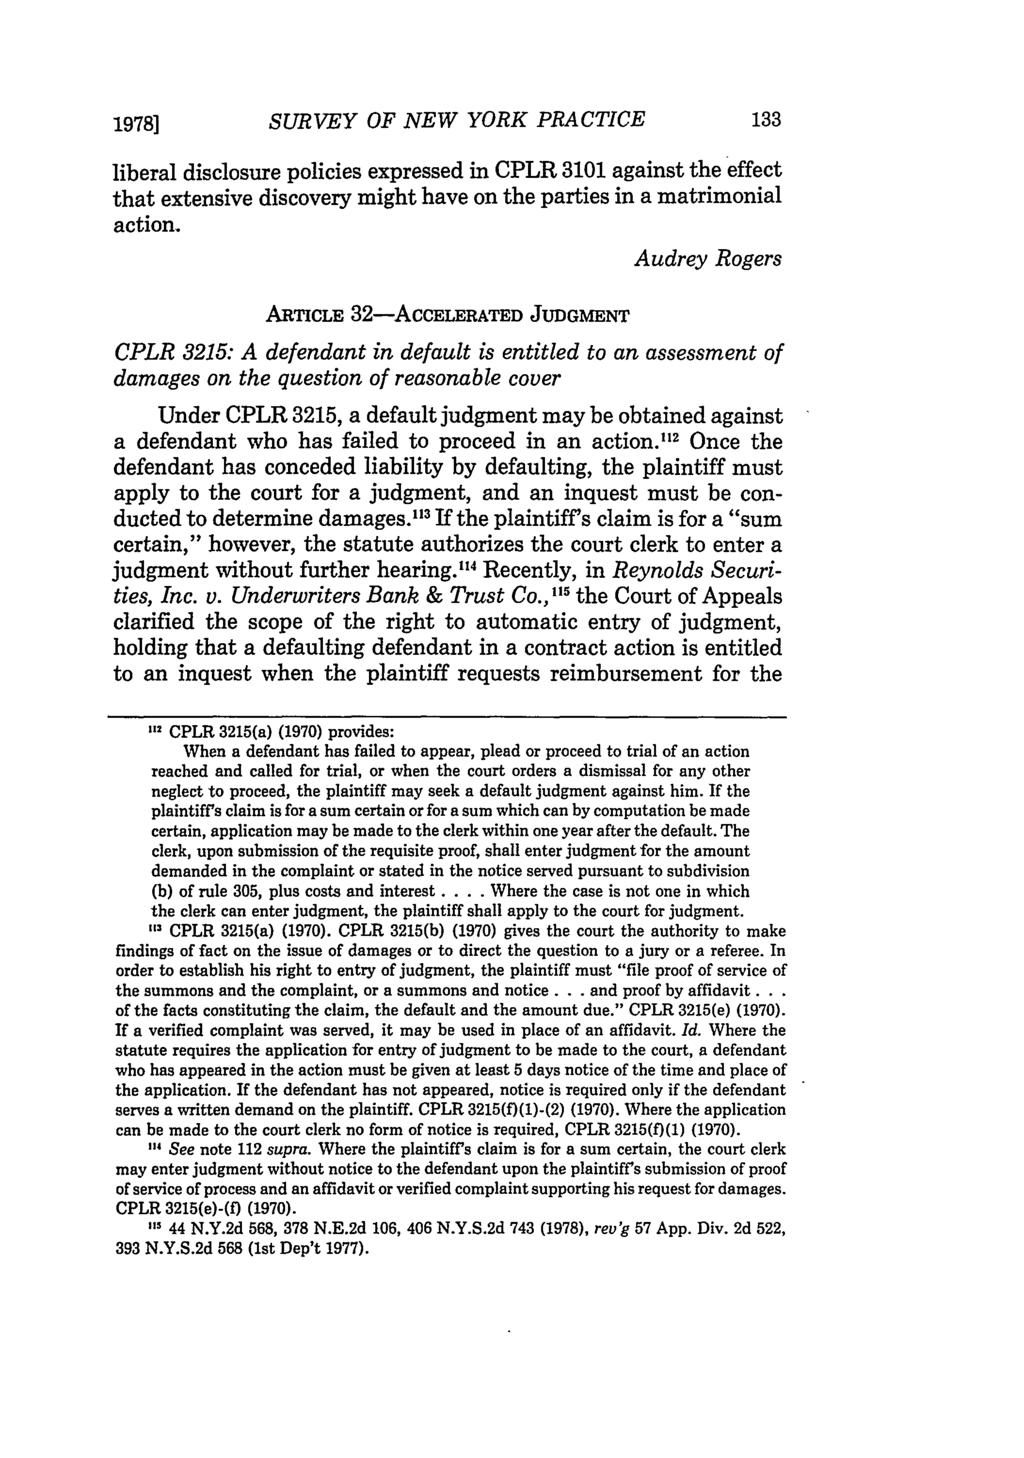 1978] SURVEY OF NEW YORK PRACTICE liberal disclosure policies expressed in CPLR 3101 against the effect that extensive discovery might have on the parties in a matrimonial action.